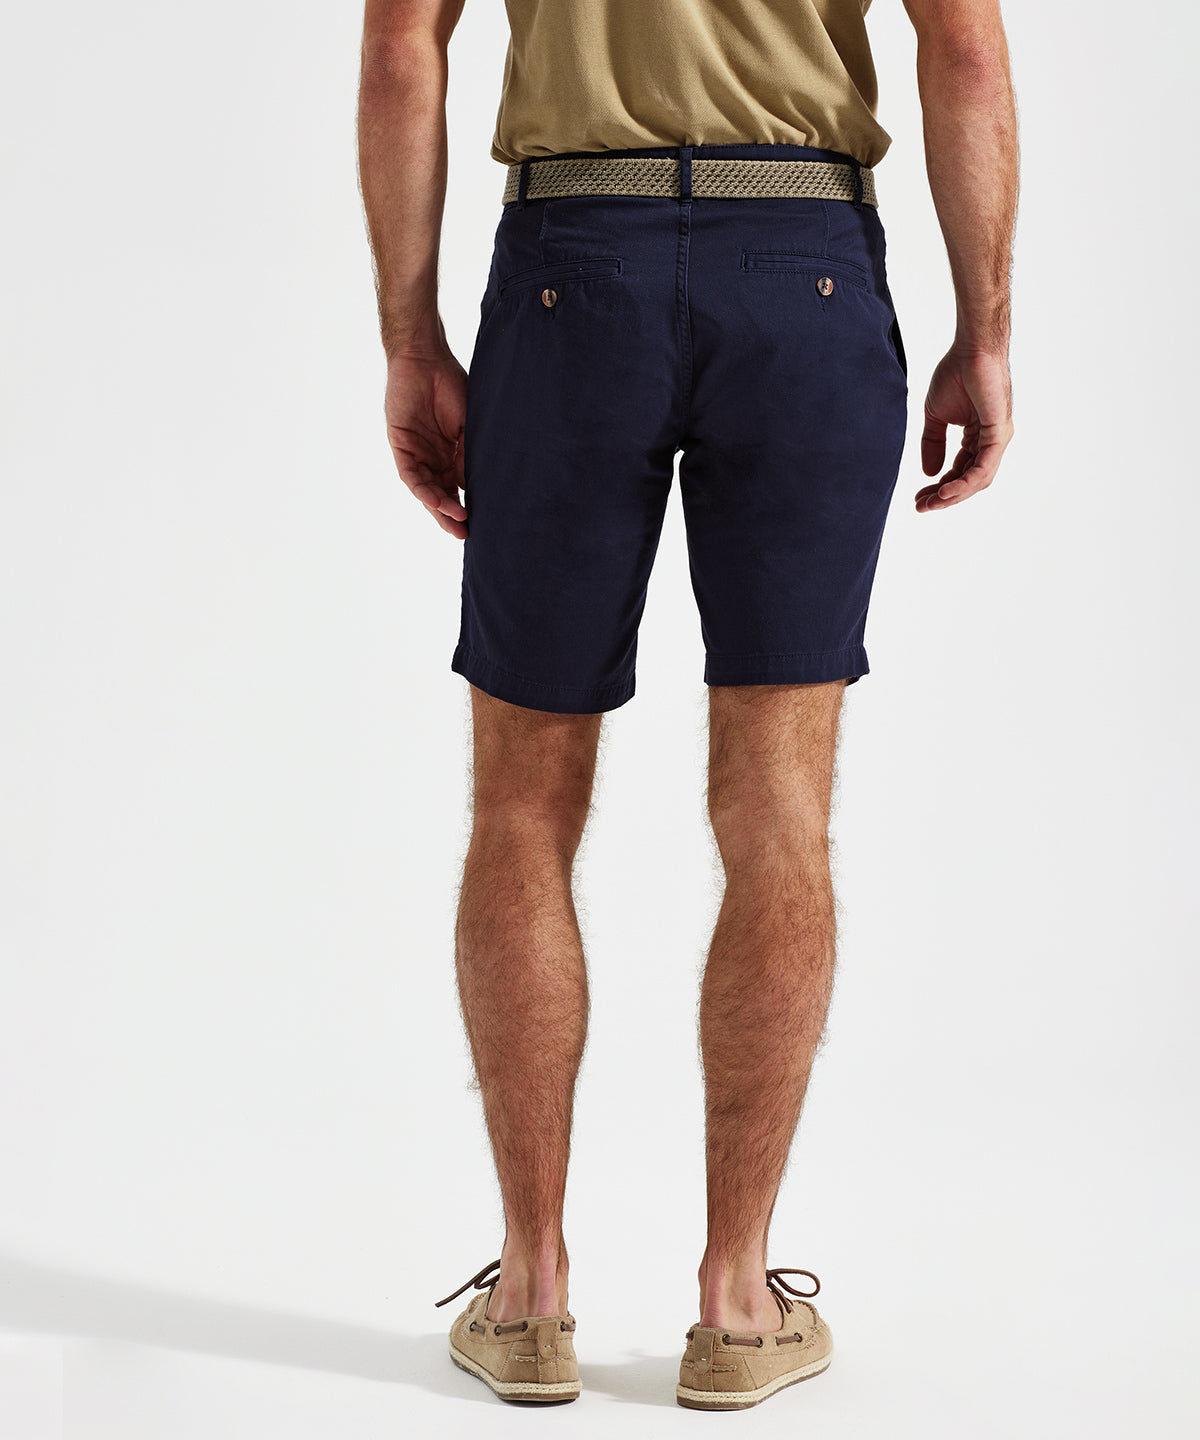 Men's Chino Shorts, Navy - Casuals and Separates